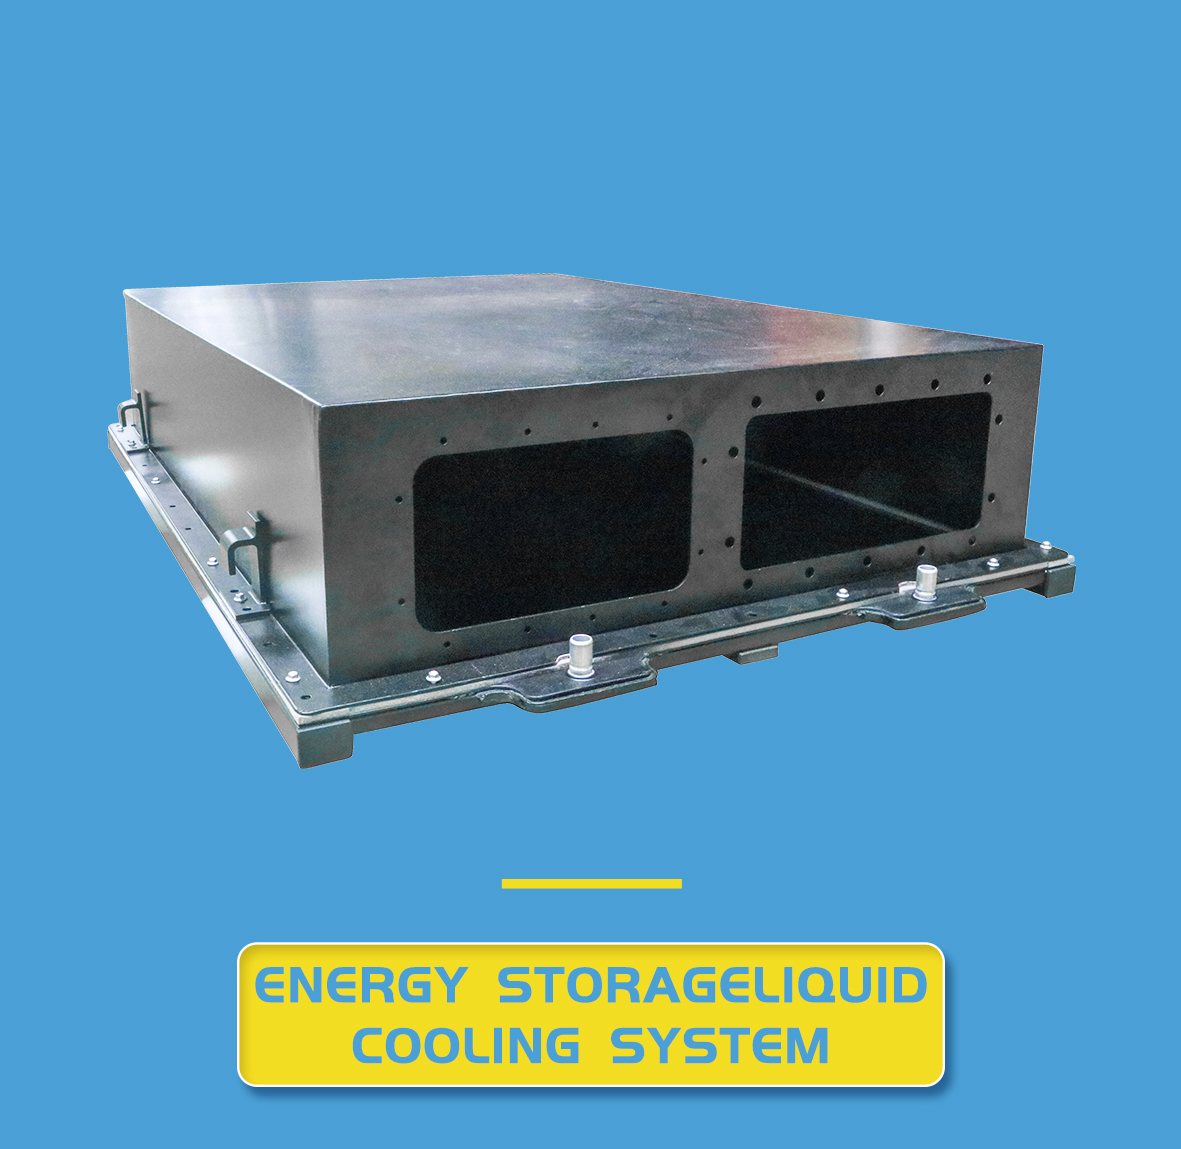 ENERGY STORAGELIOUID COOLING SYSTEM 1